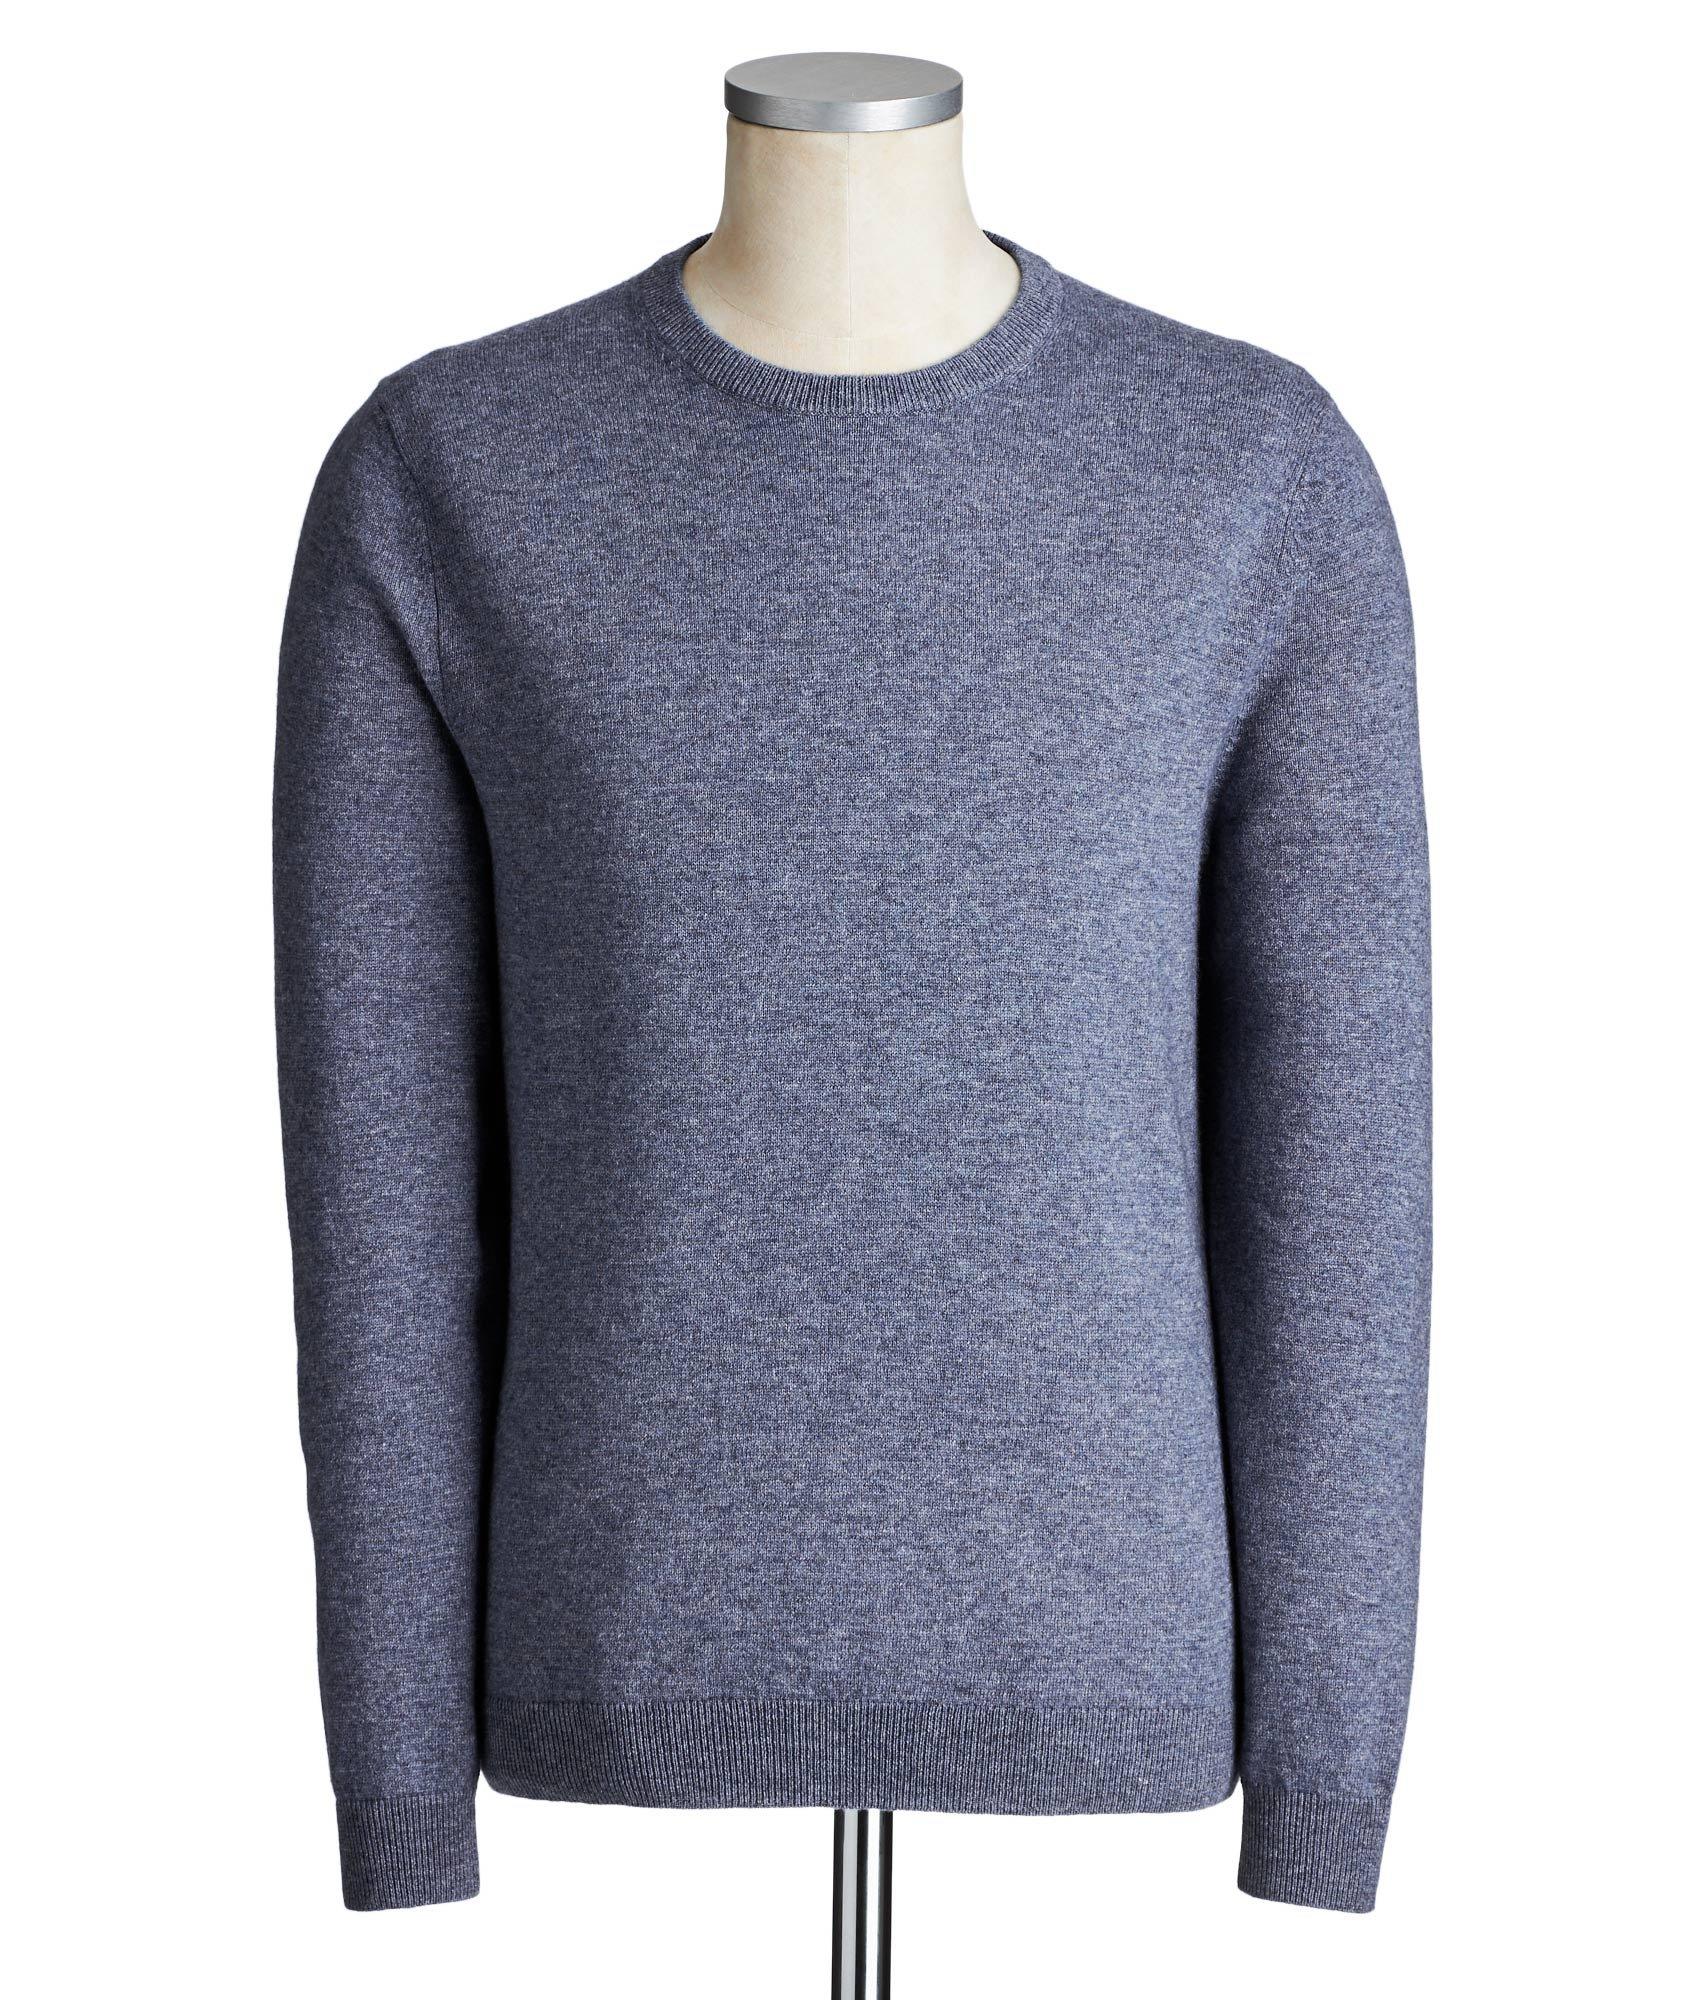 SeaCell Cashmere Sweater image 0